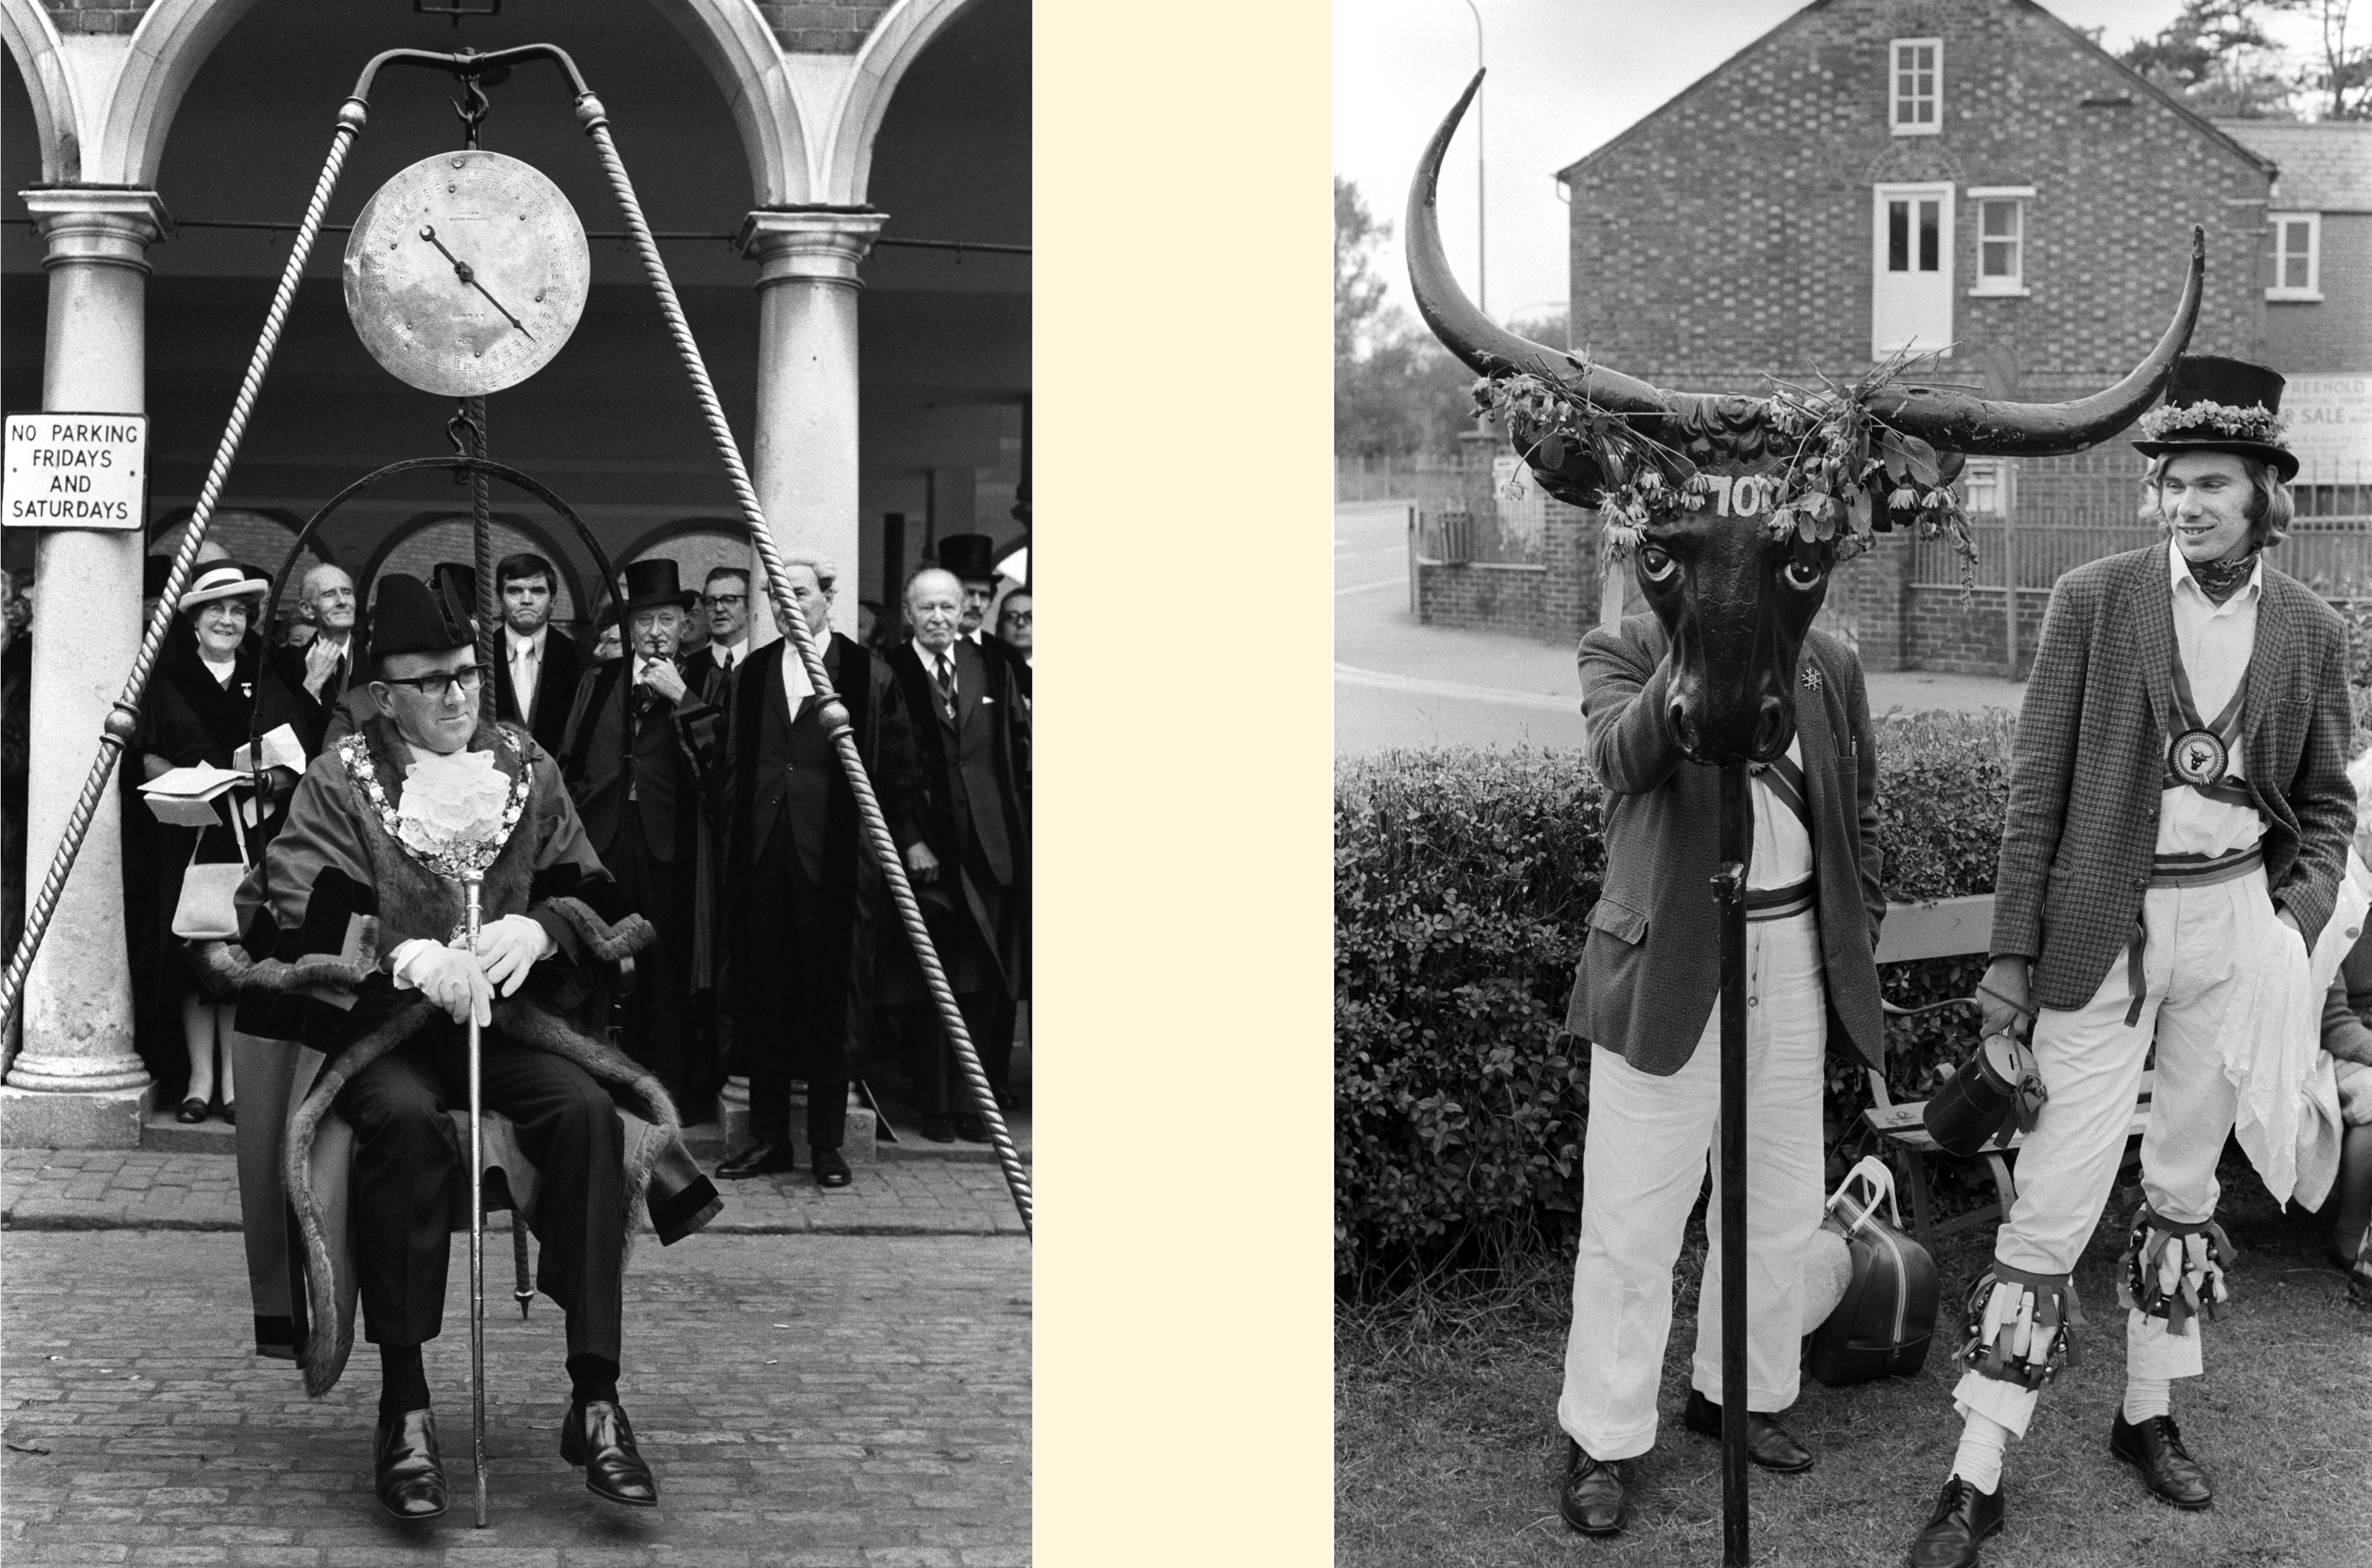 The Election of the Mayor of Ock Street, Abingdon, Oxfordshire. England 1971 The Horns.